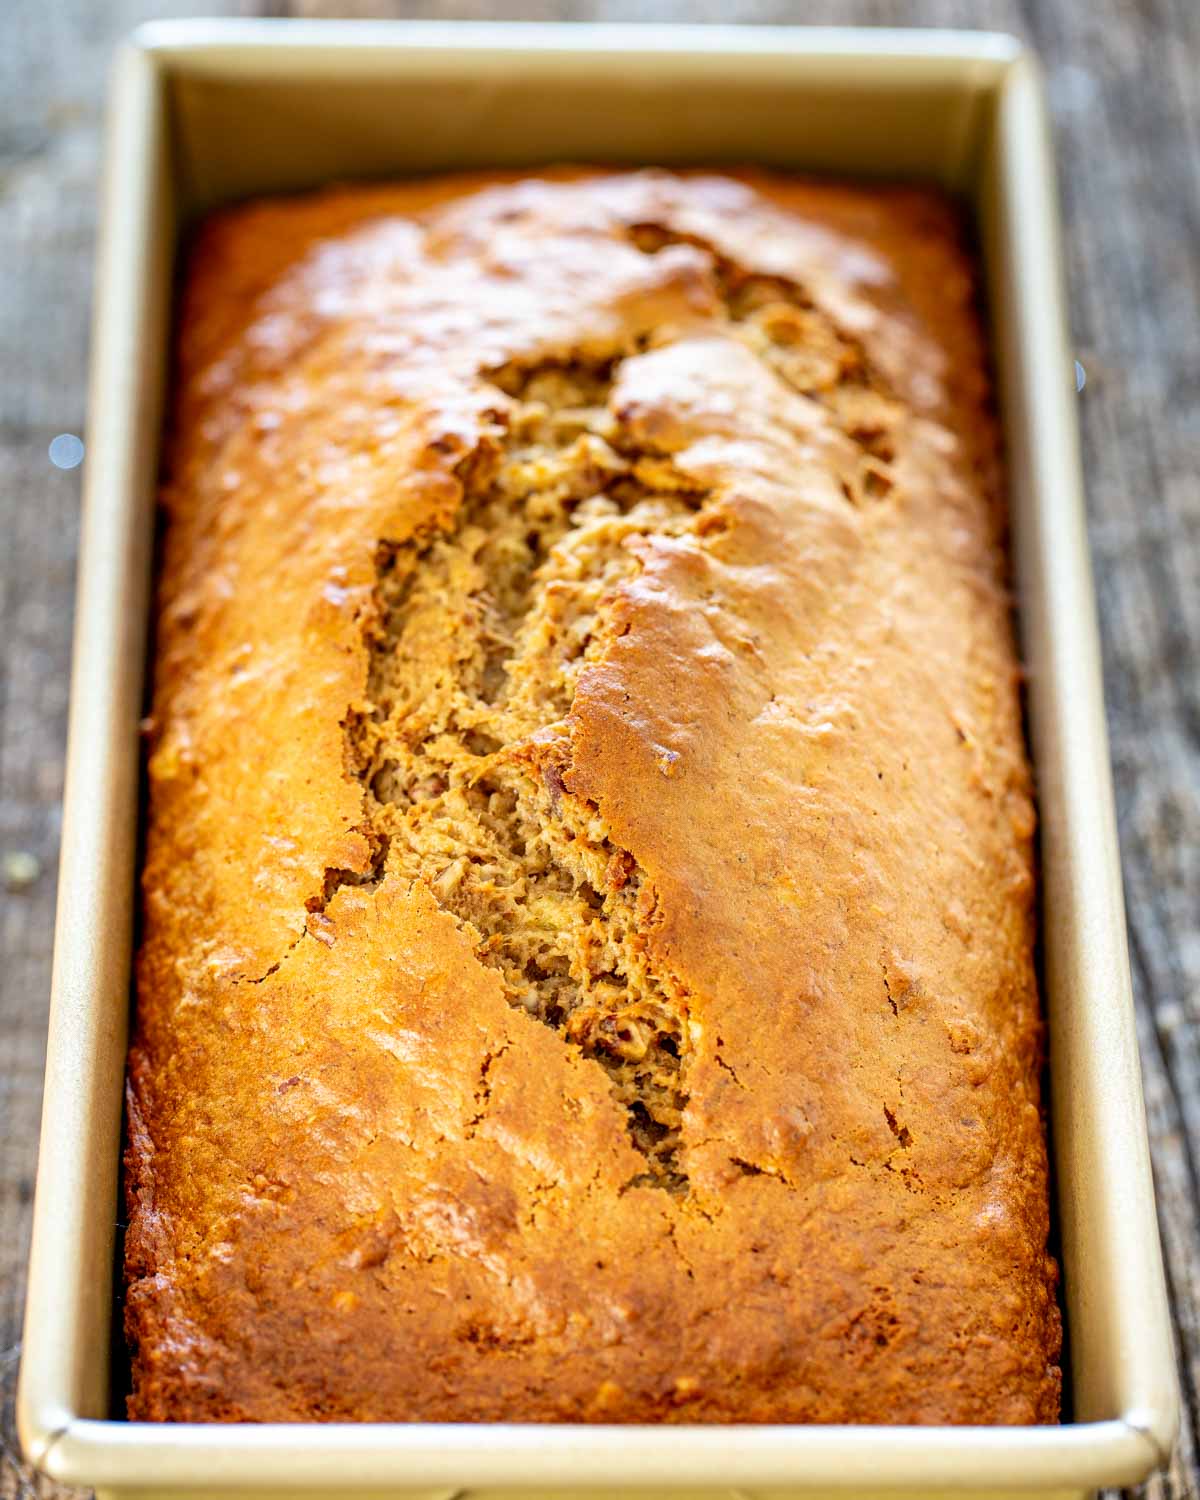 banana nut bread in a loaf pan fresh out of the oven.